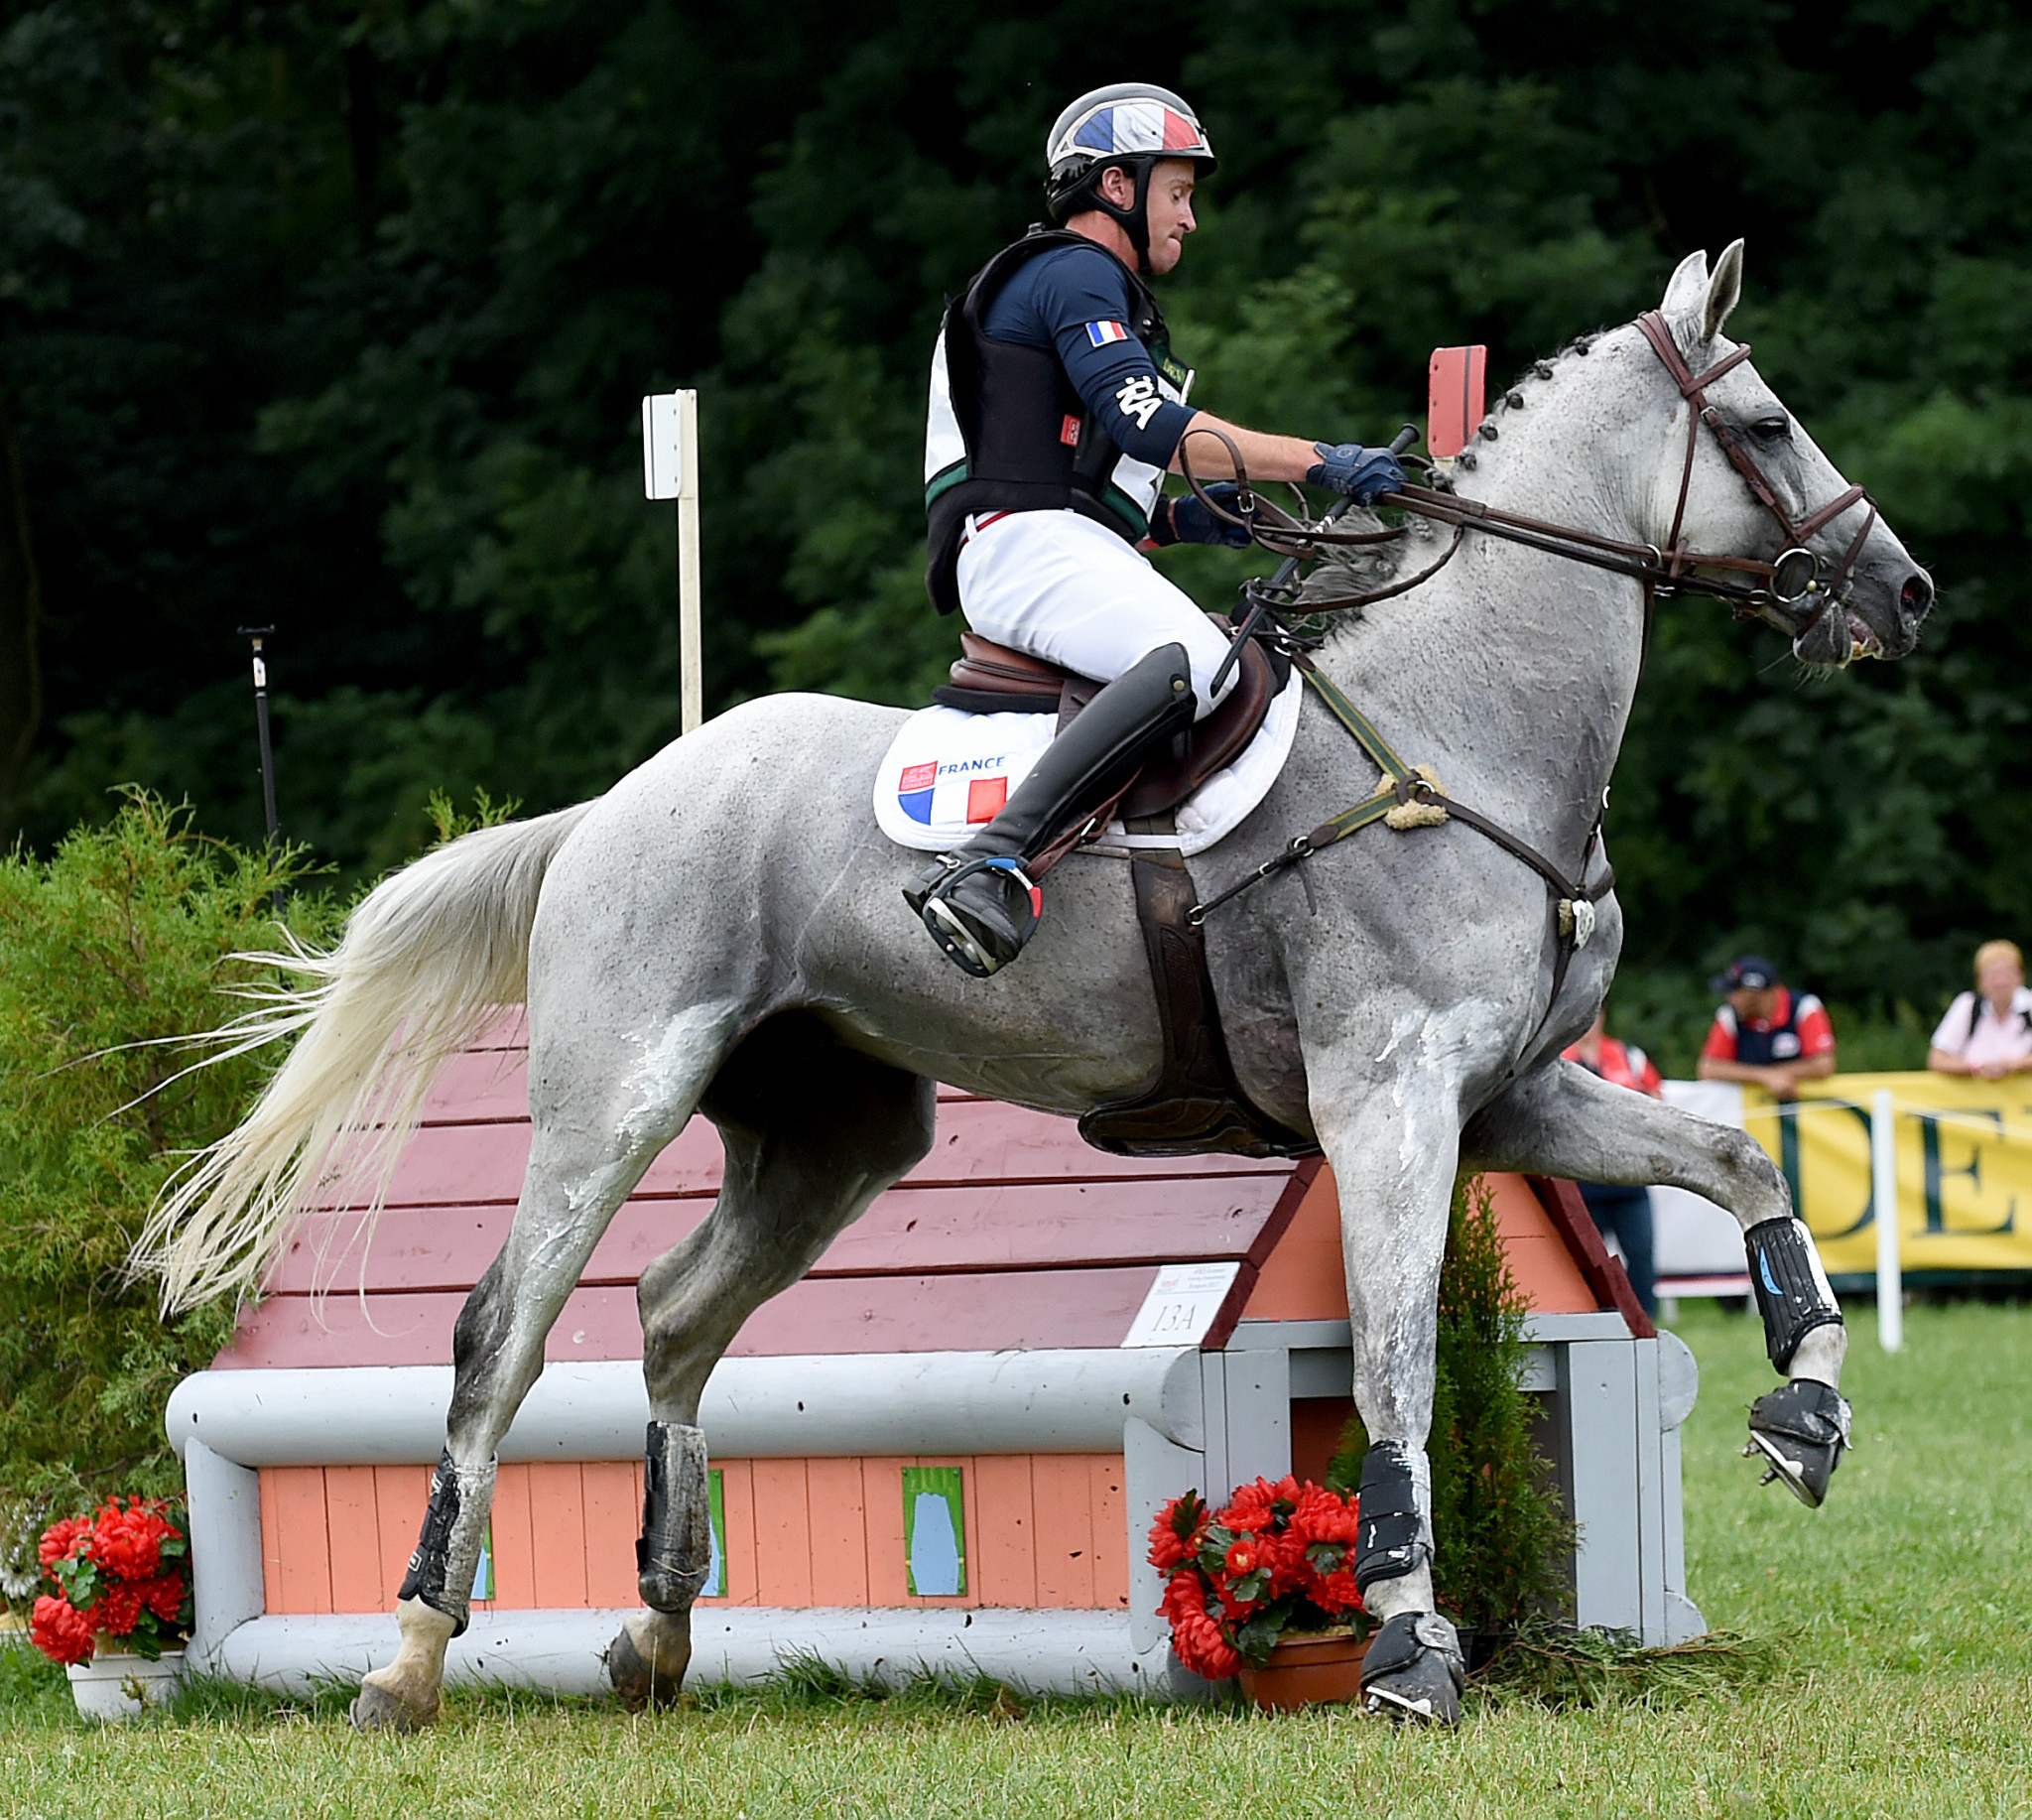 France and United States share lead after dressage at FEI Nations Cup Eventing